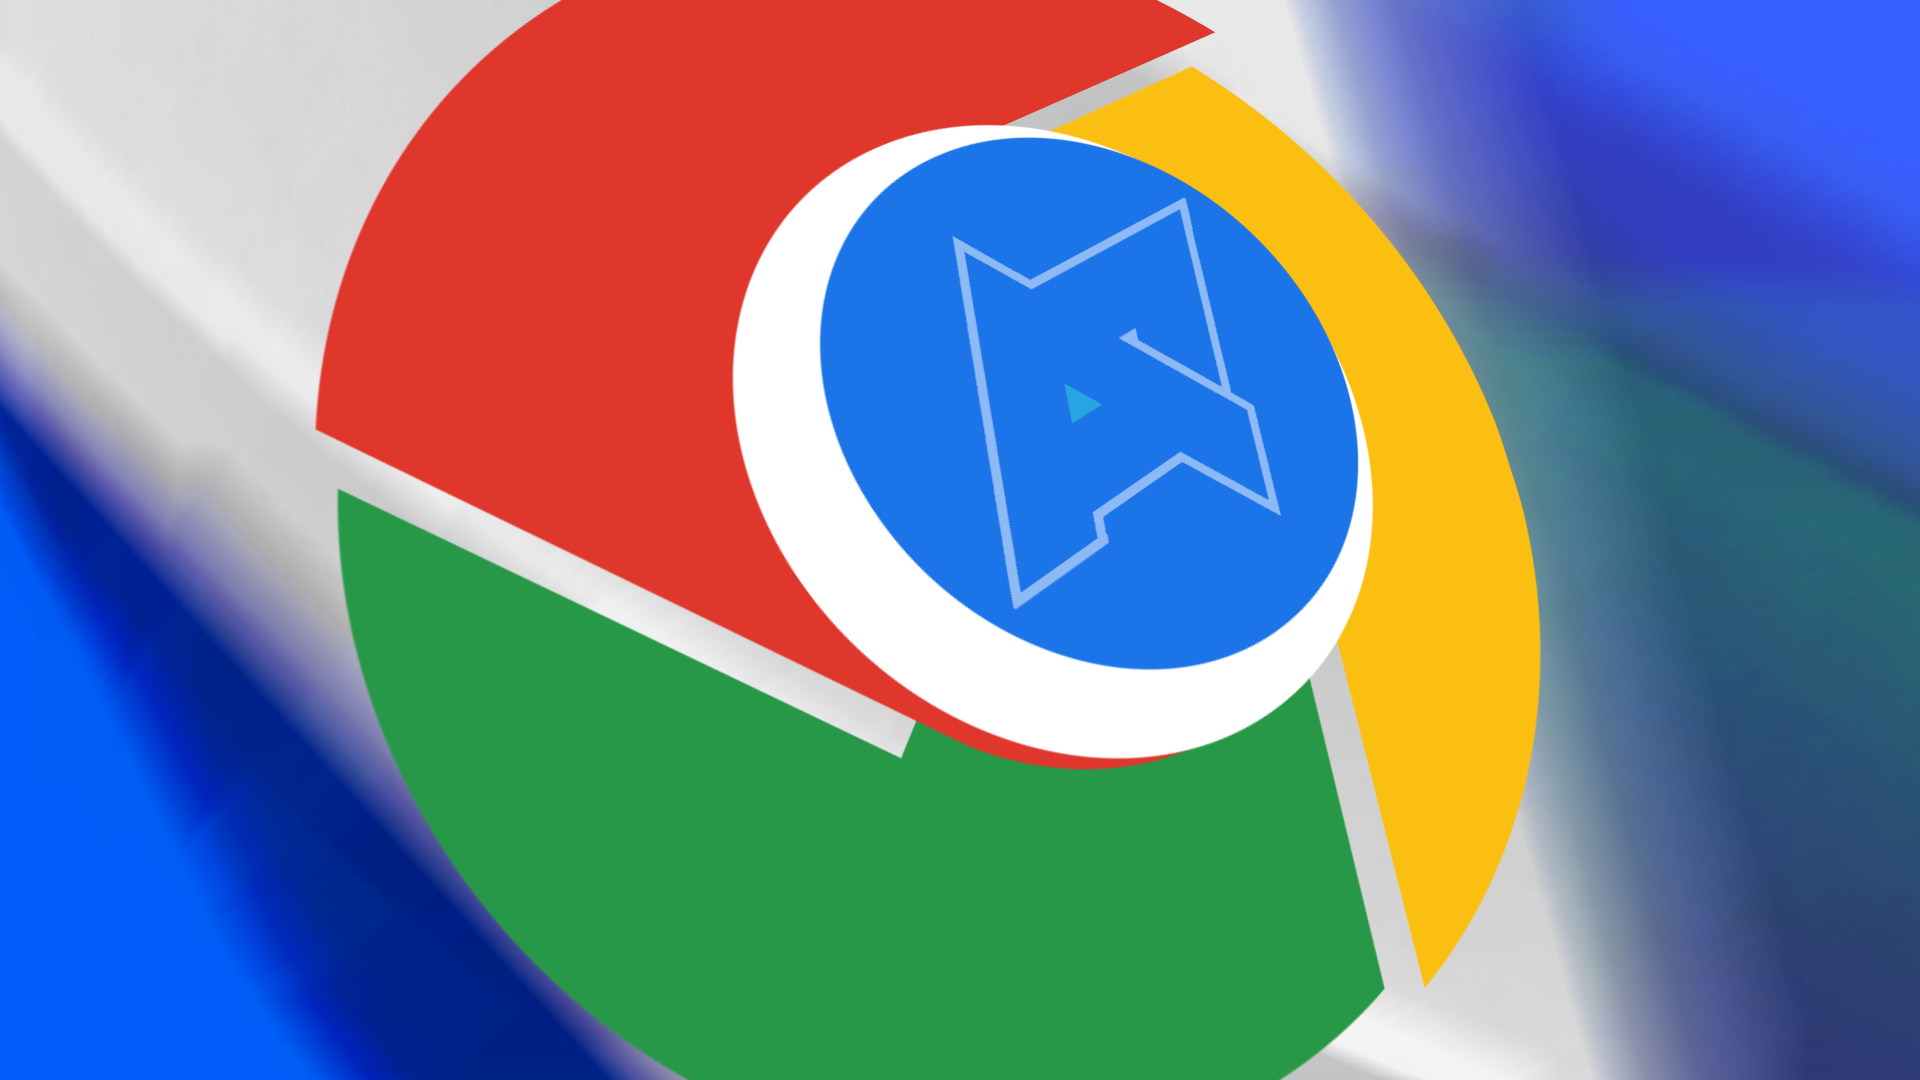 The Google Chrome logo against a blue and white background.